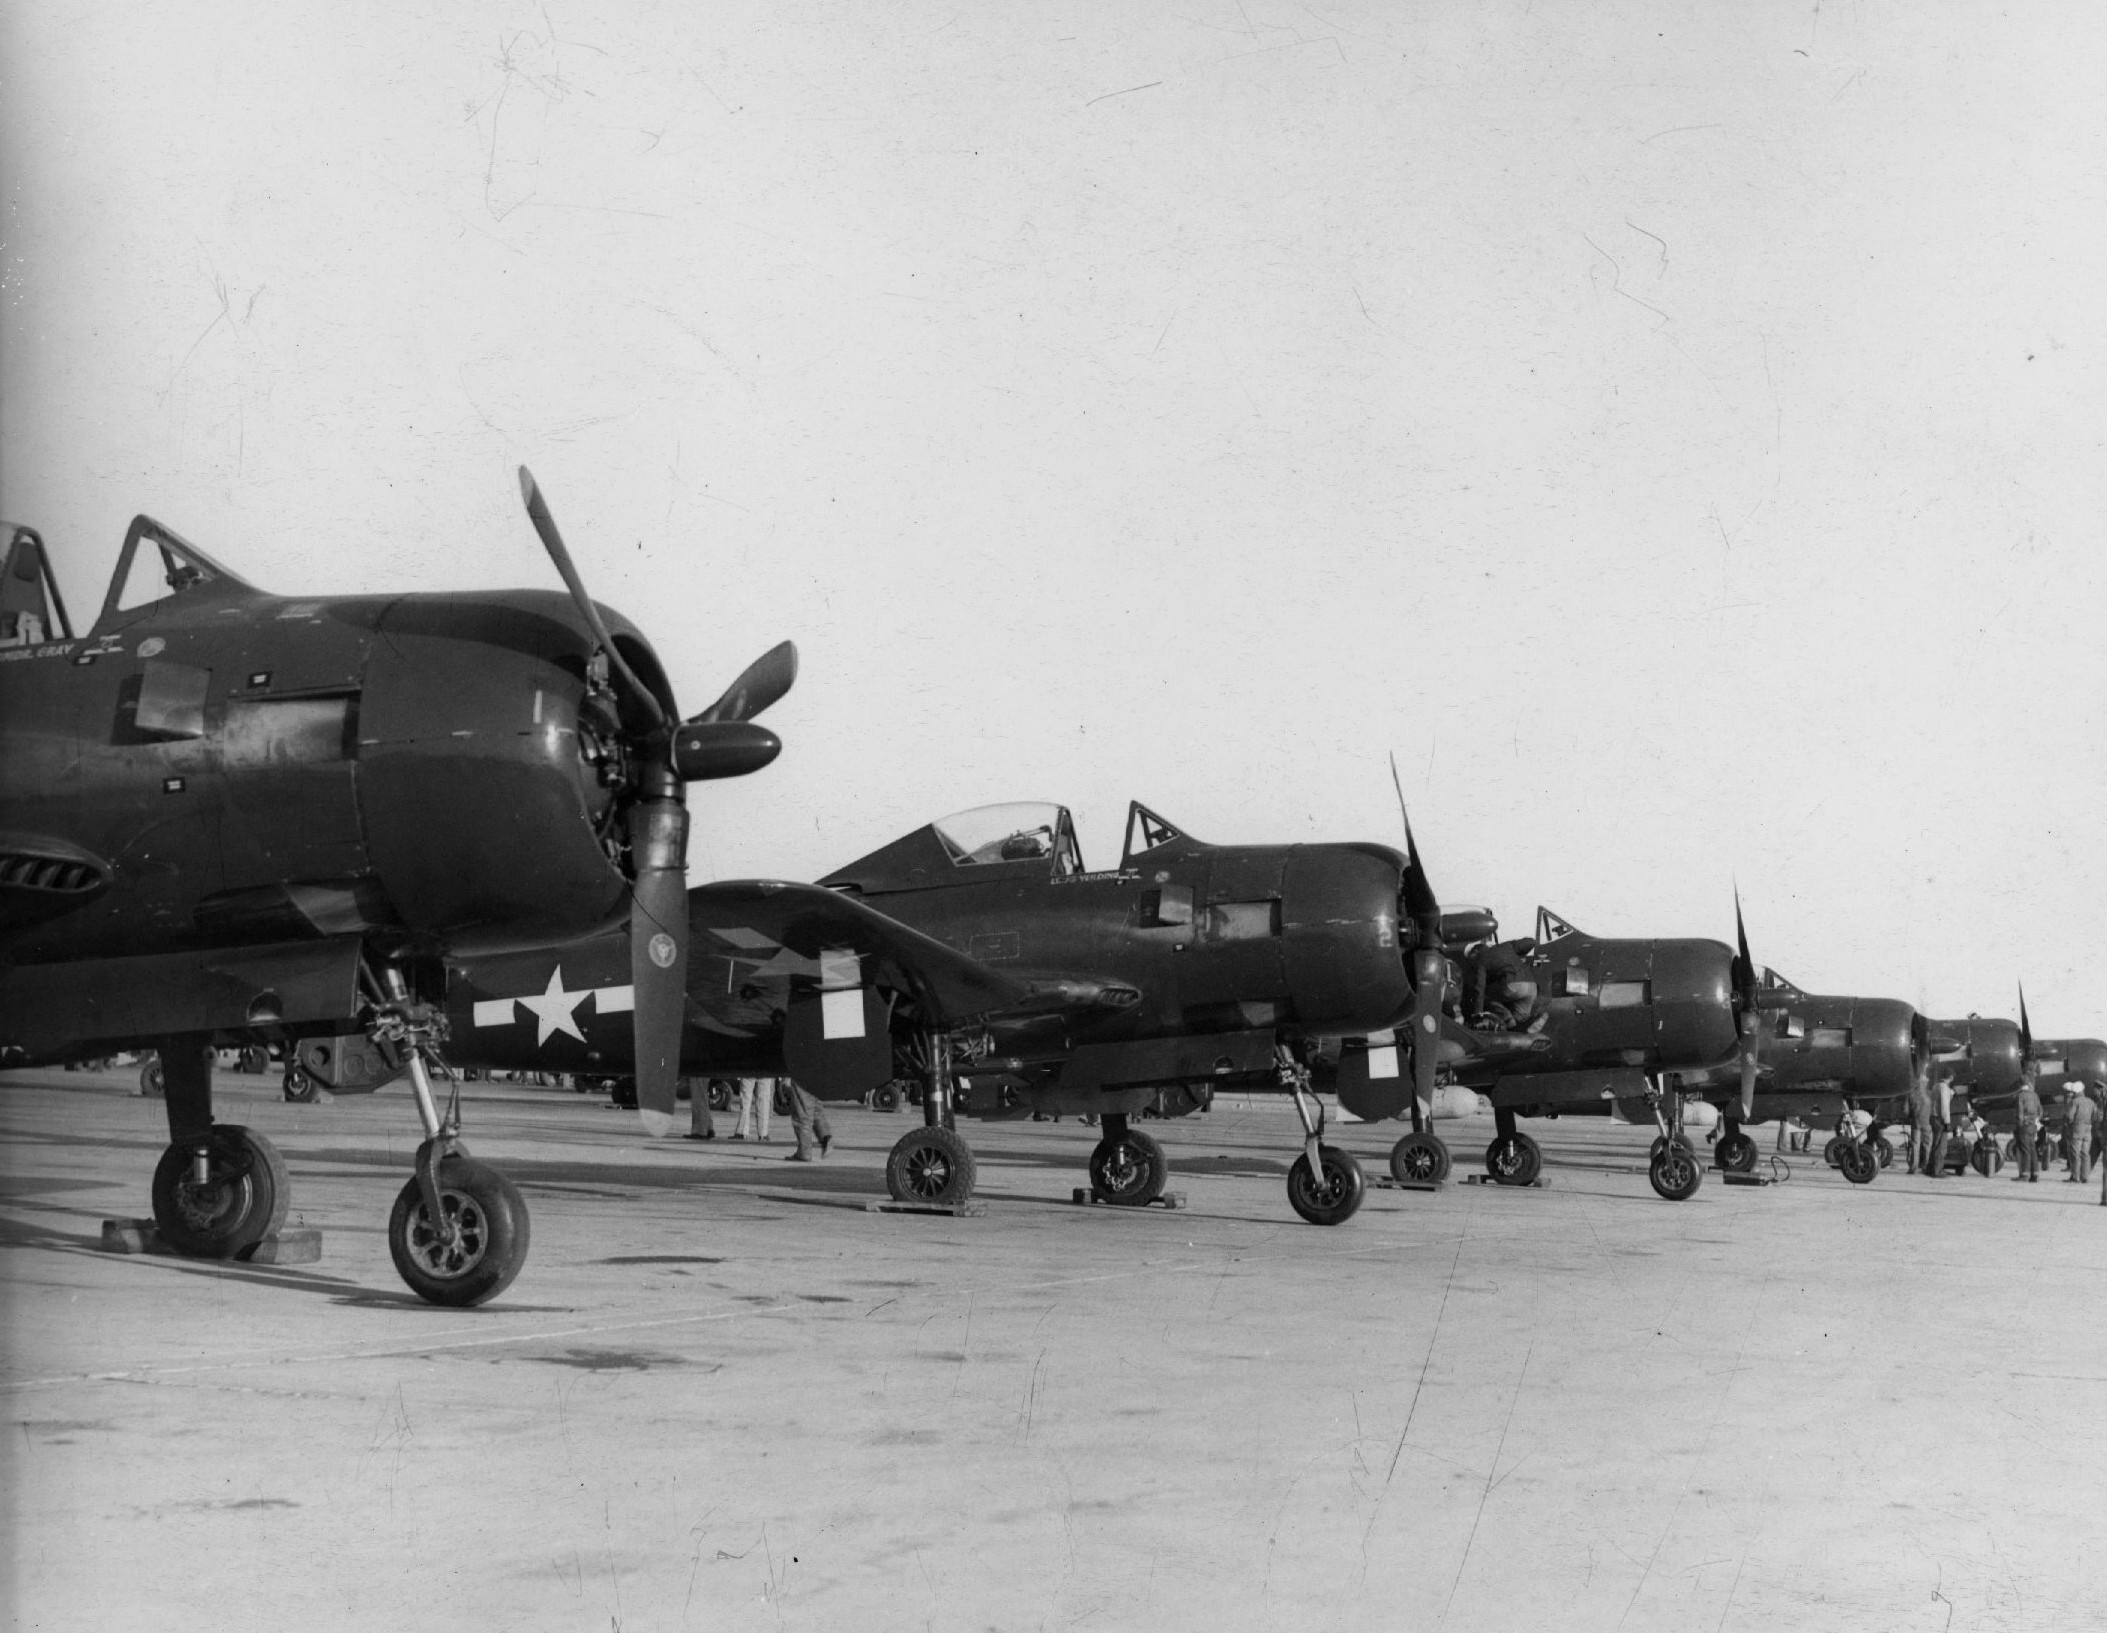 FR-1 Fireball fighters of US Navy squadron VF-66 at rest, Naval Air Station North Island, California, United States, 1945